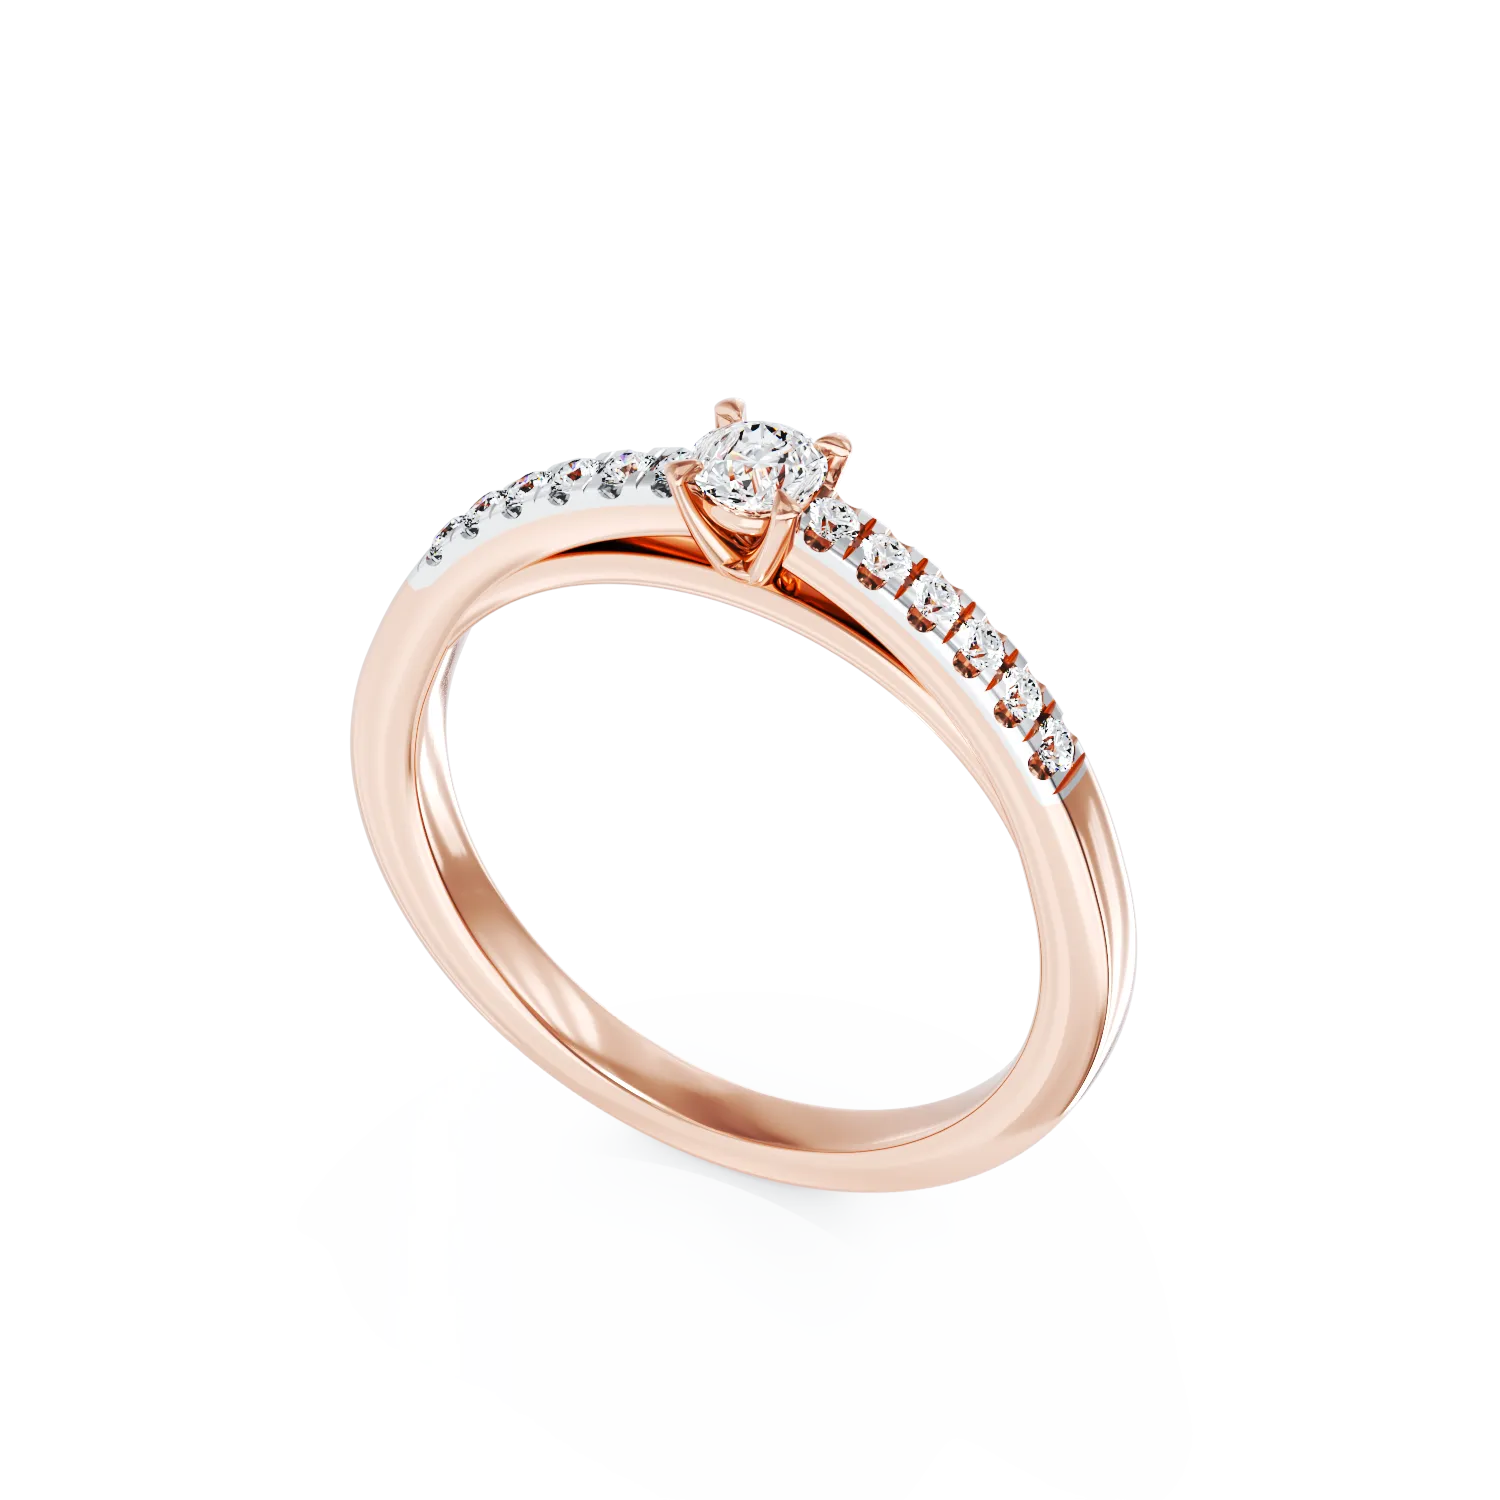 18K rose gold engagement ring with 0.28ct diamond and 0.12ct diamonds